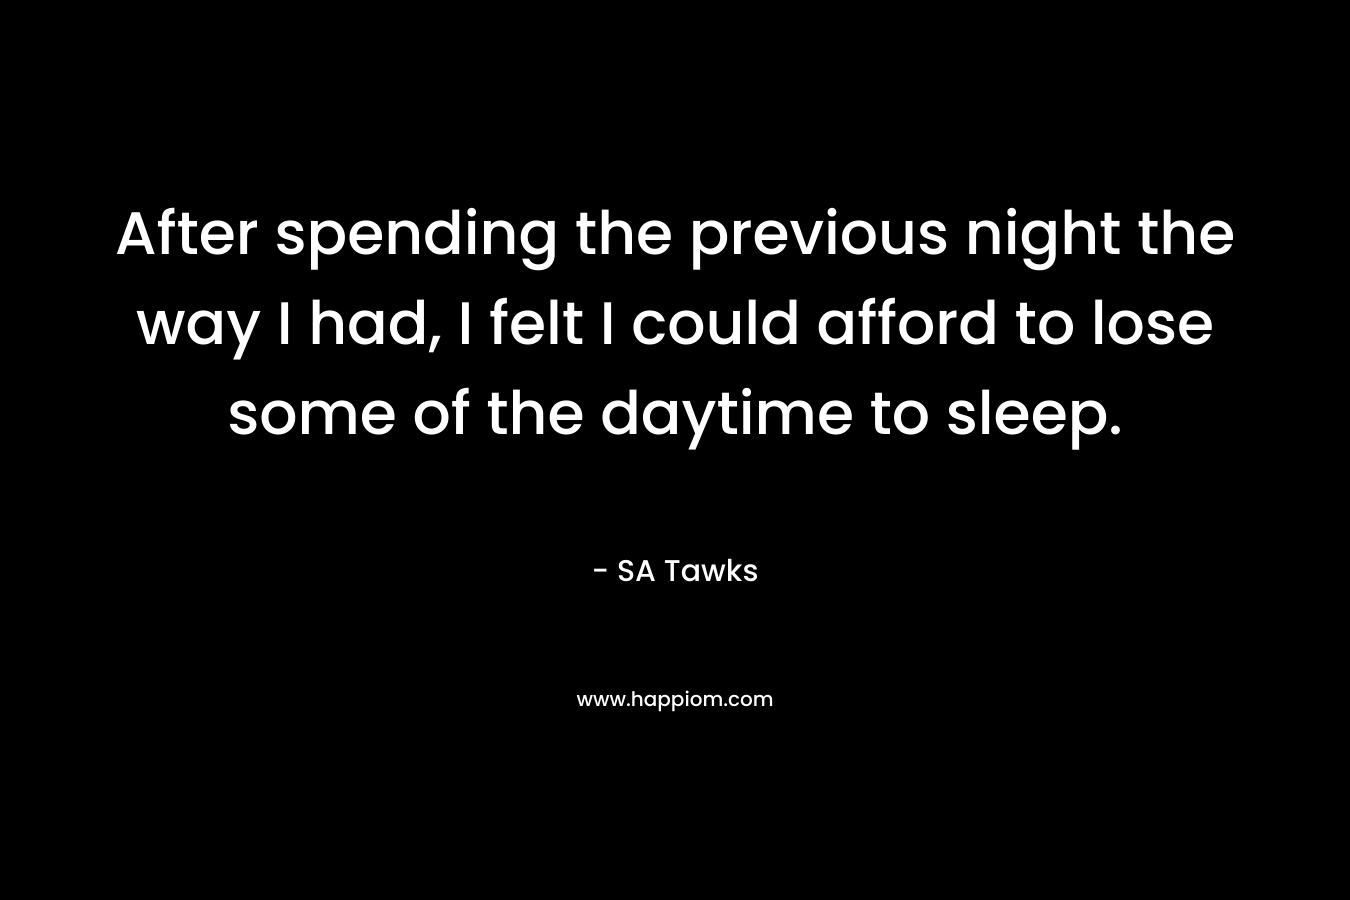 After spending the previous night the way I had, I felt I could afford to lose some of the daytime to sleep. – SA Tawks